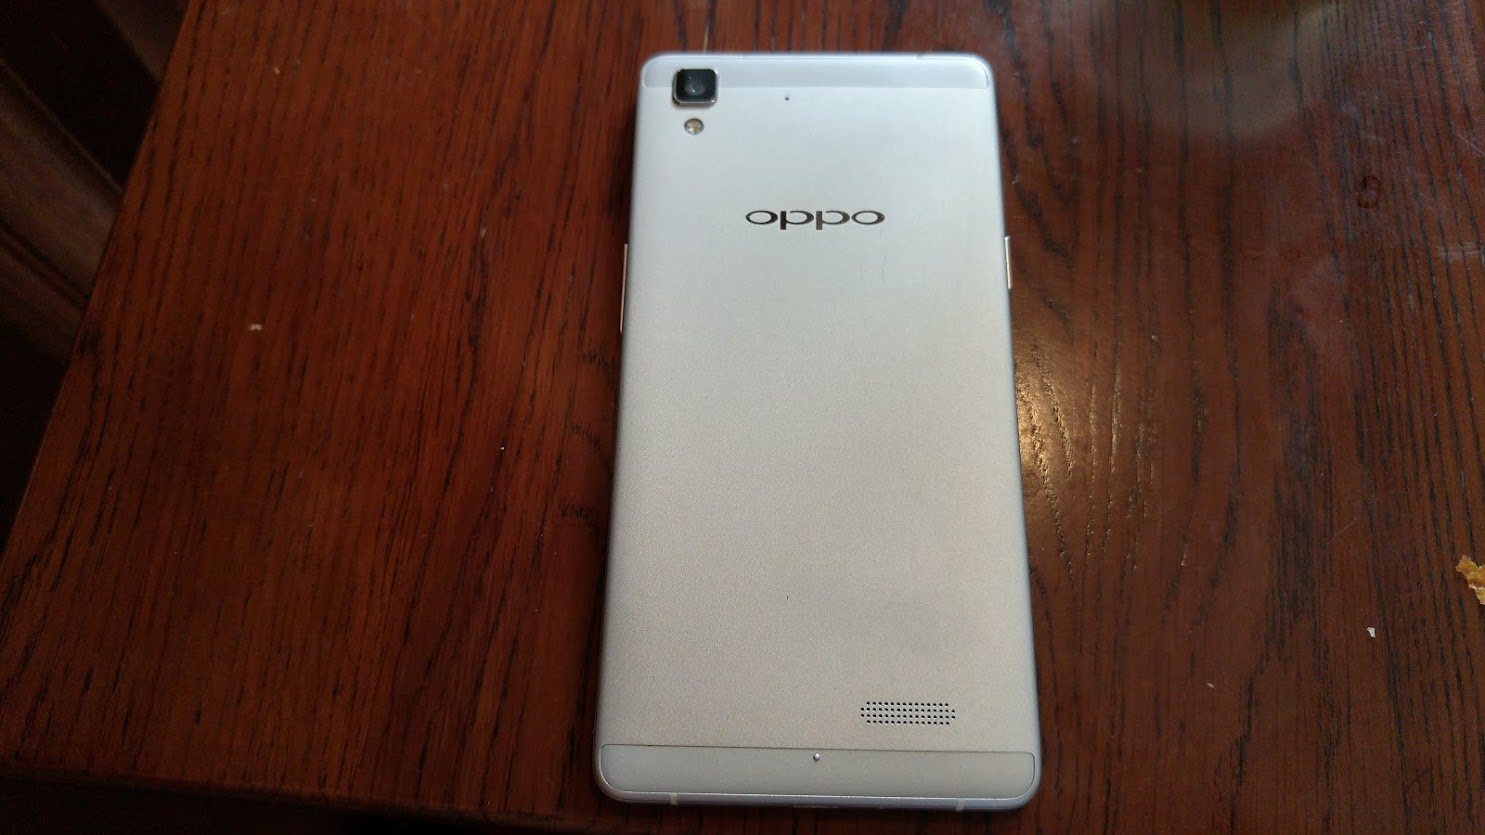 Oppo R7 and R7 Plus Go Official with Snapdragon 615 Inside